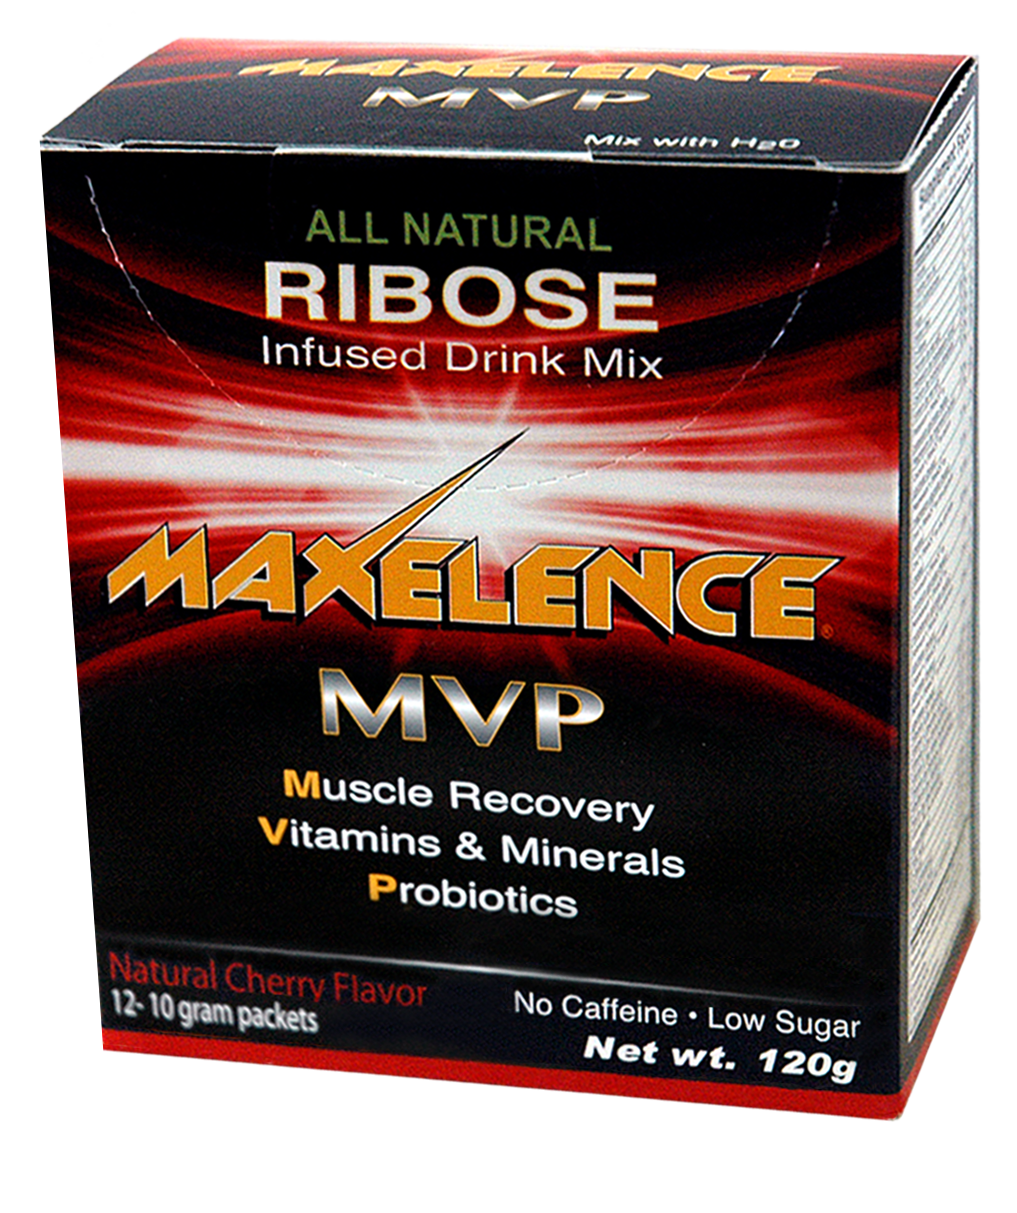 MAXelence MVP Workout Recovery Drink Mix Cherry 12 Pack Box